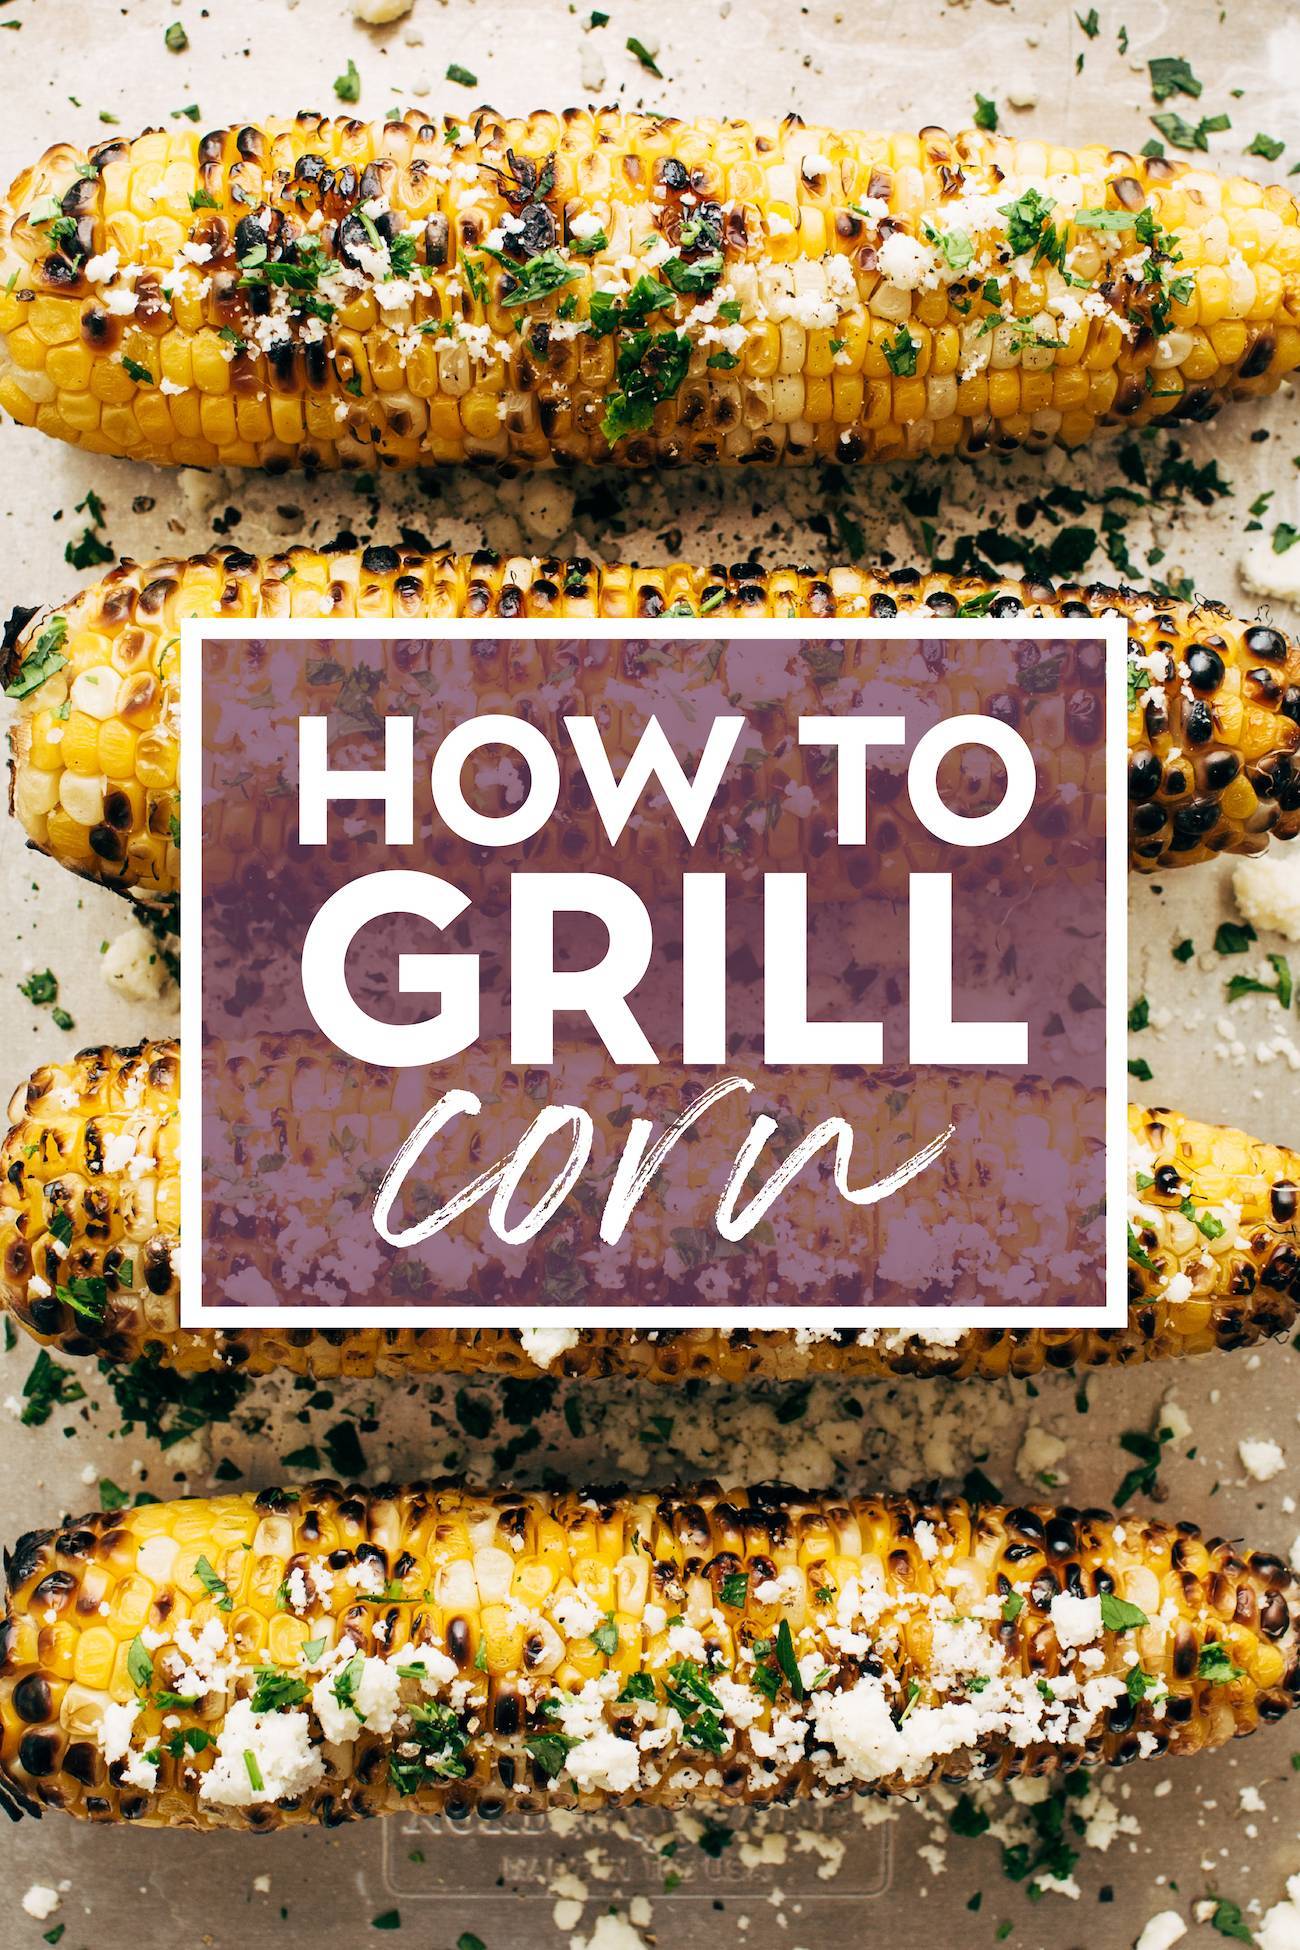 A photograph of corn on the cob with the blog title 'How to Grill Corn' written across the image.